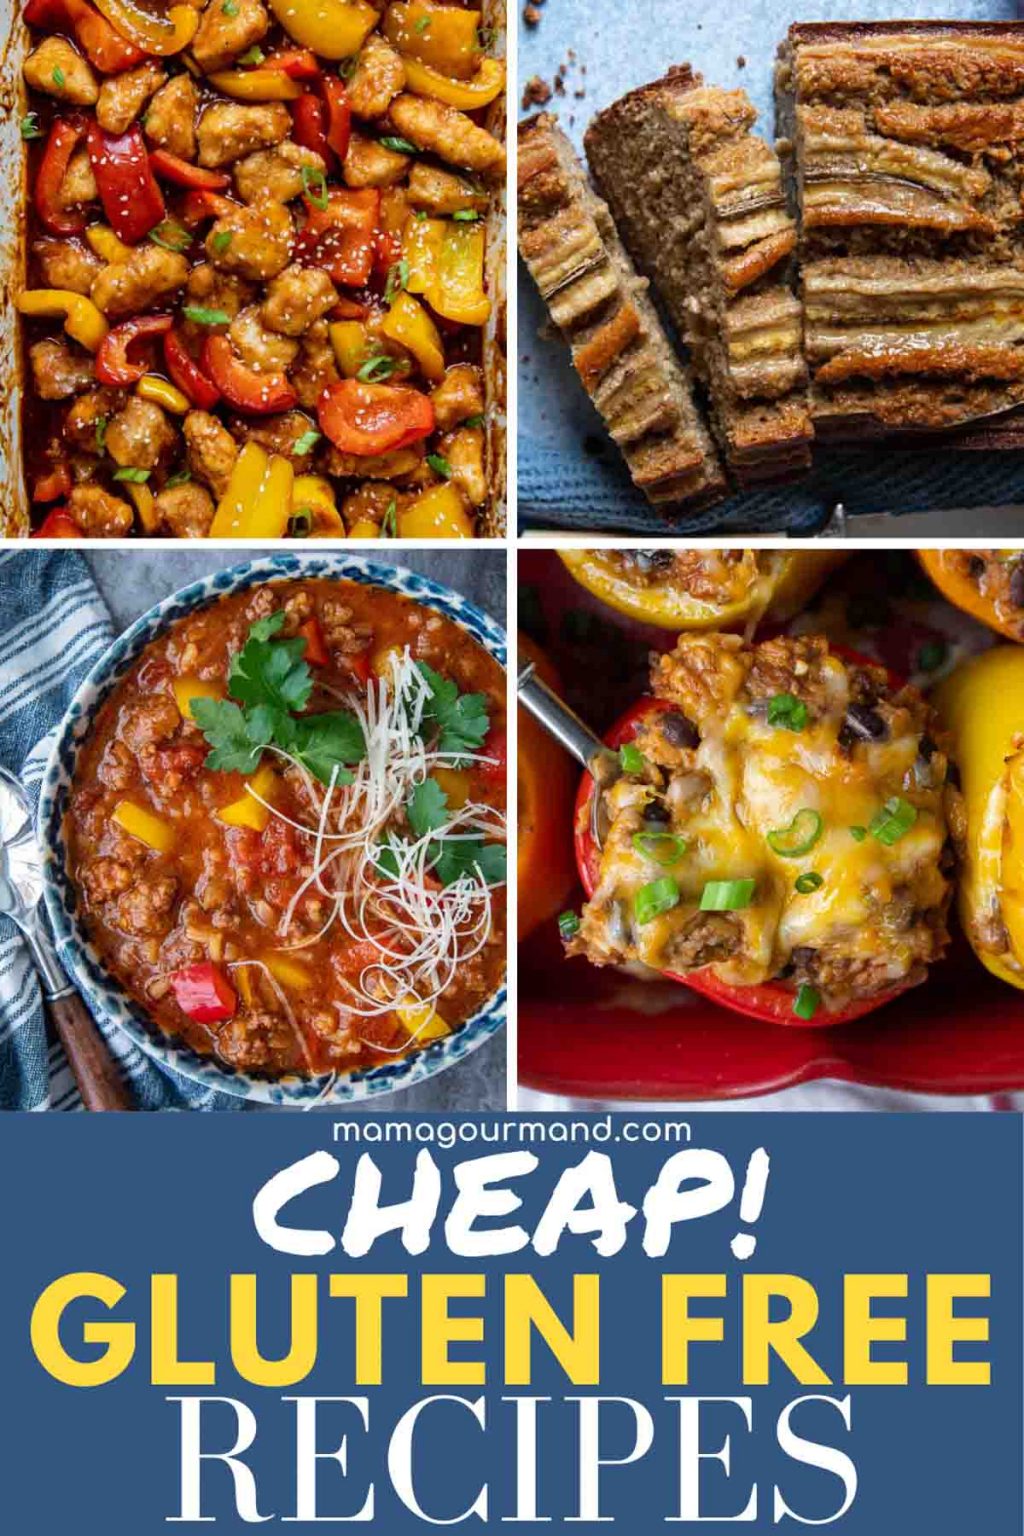 grid of different meals that are gluten free and cheap